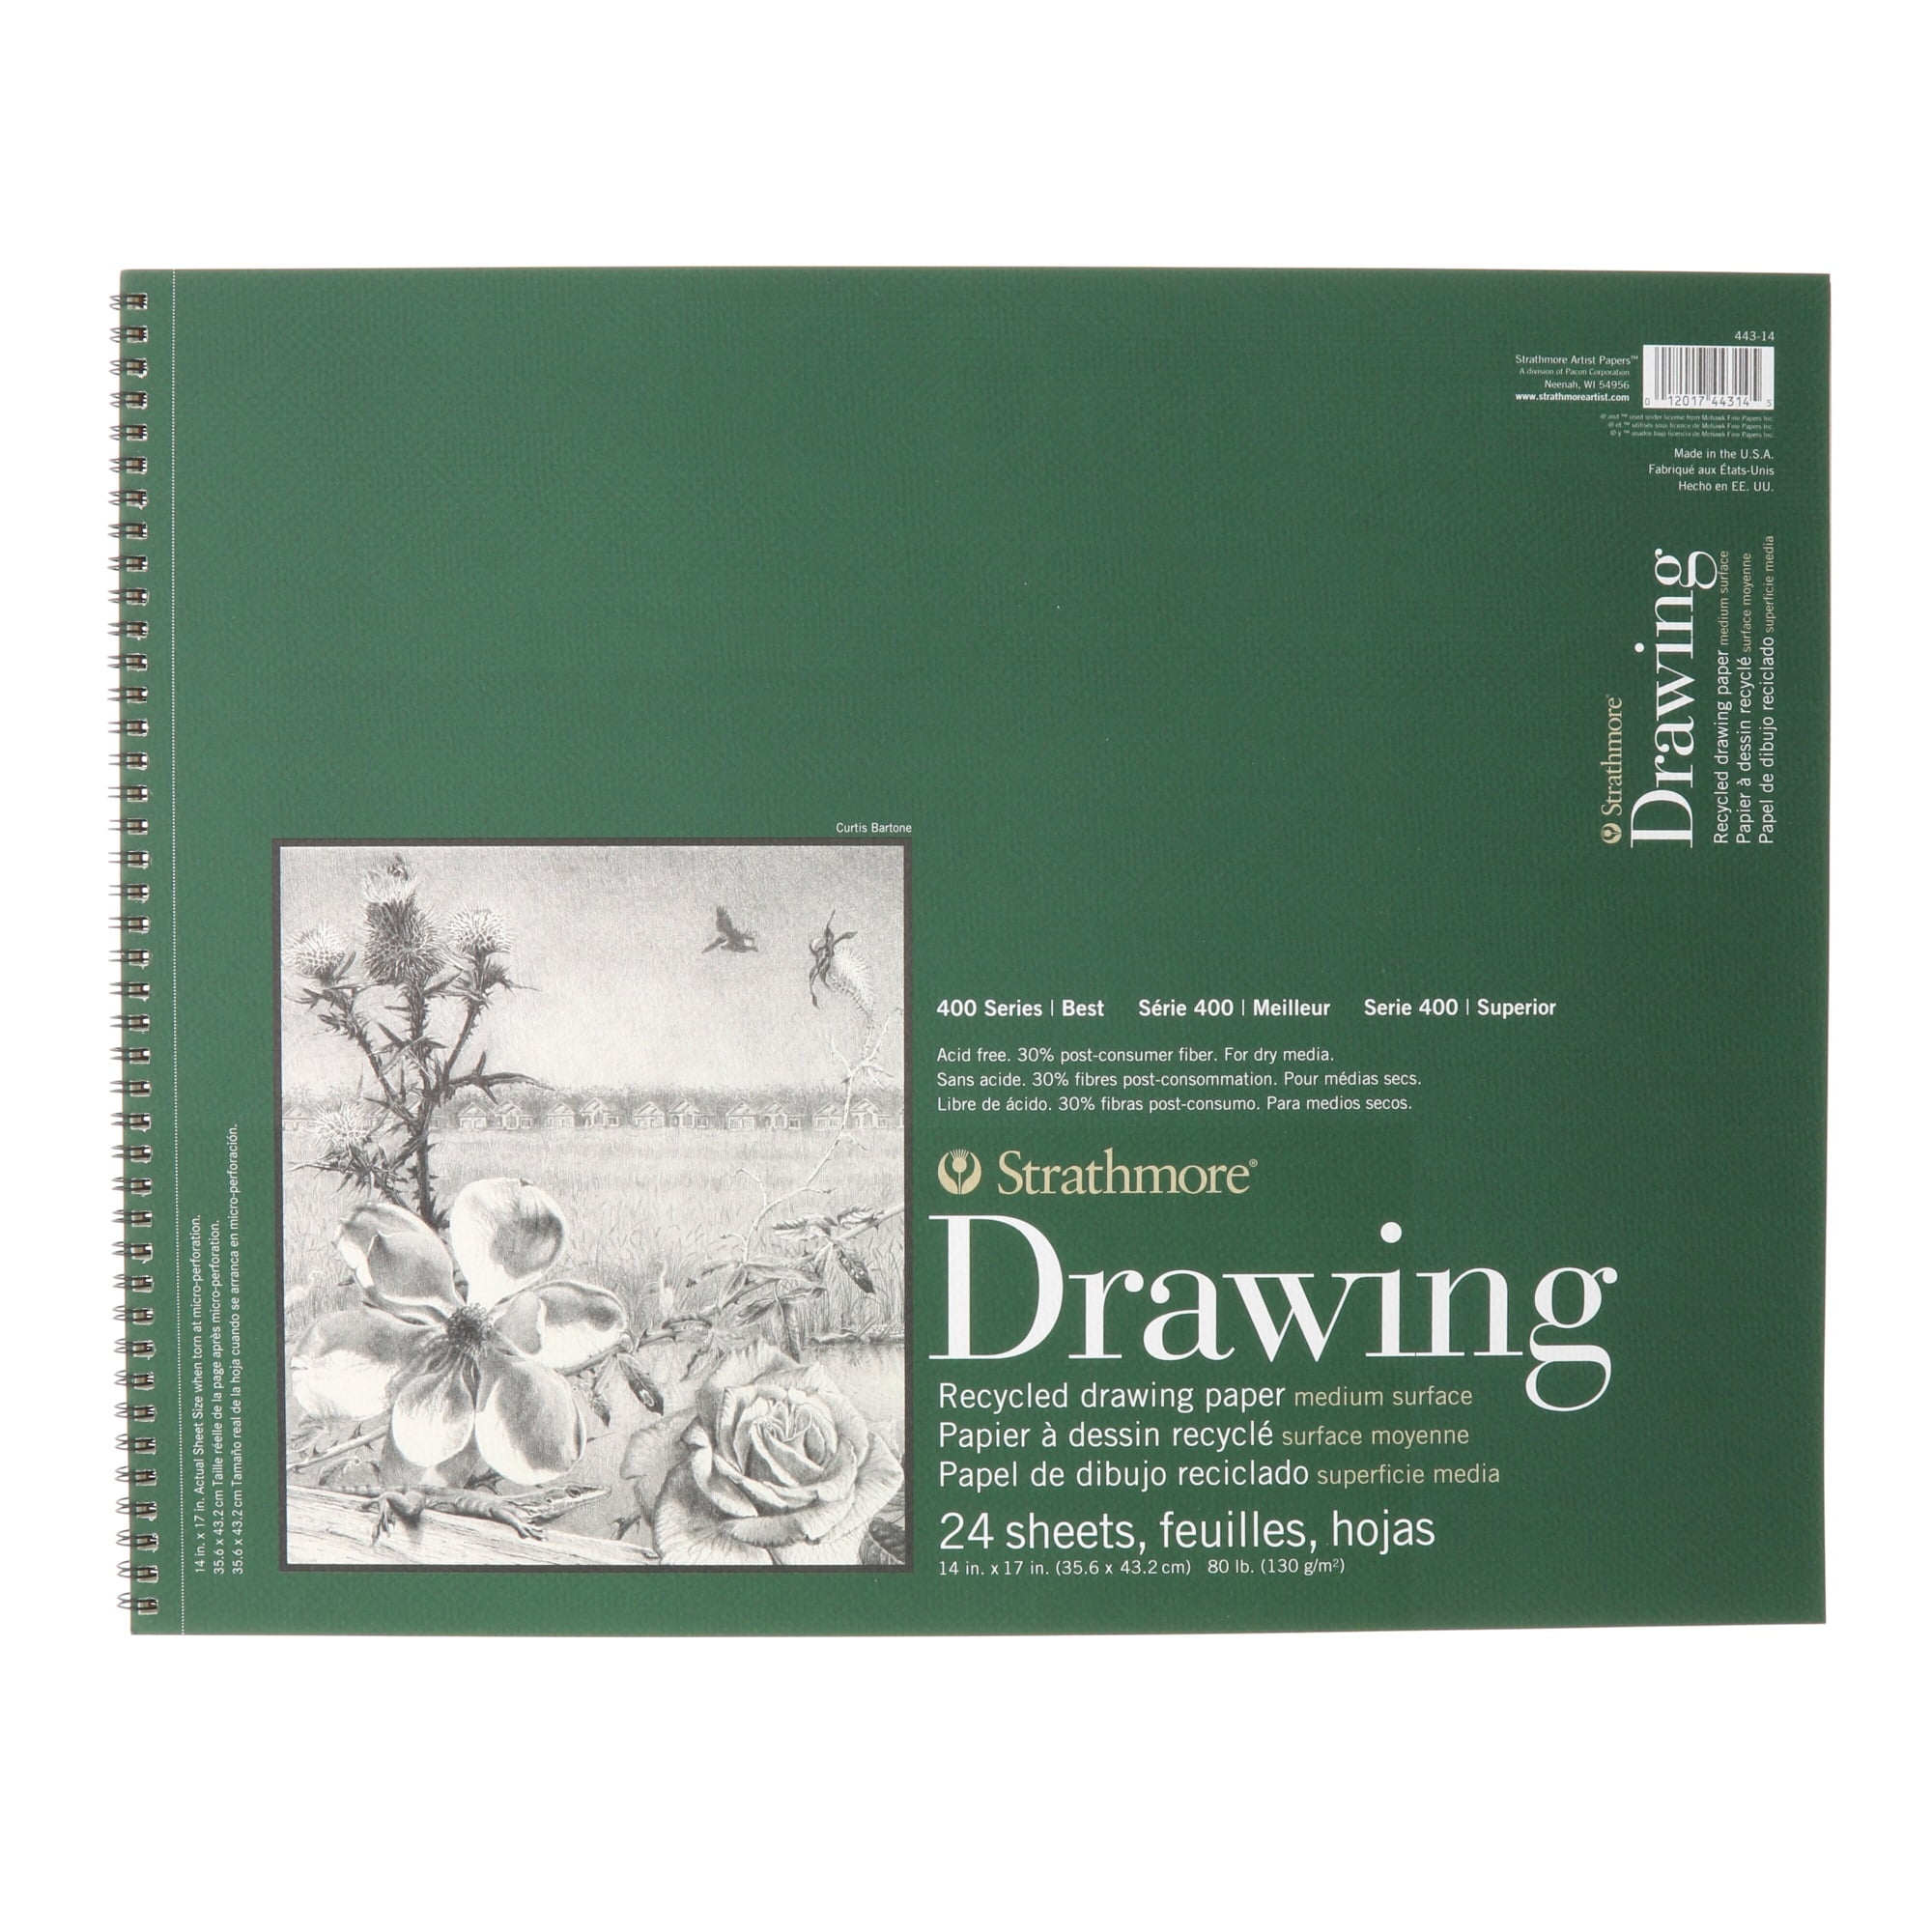 Strathmore Recycled Sketchbook